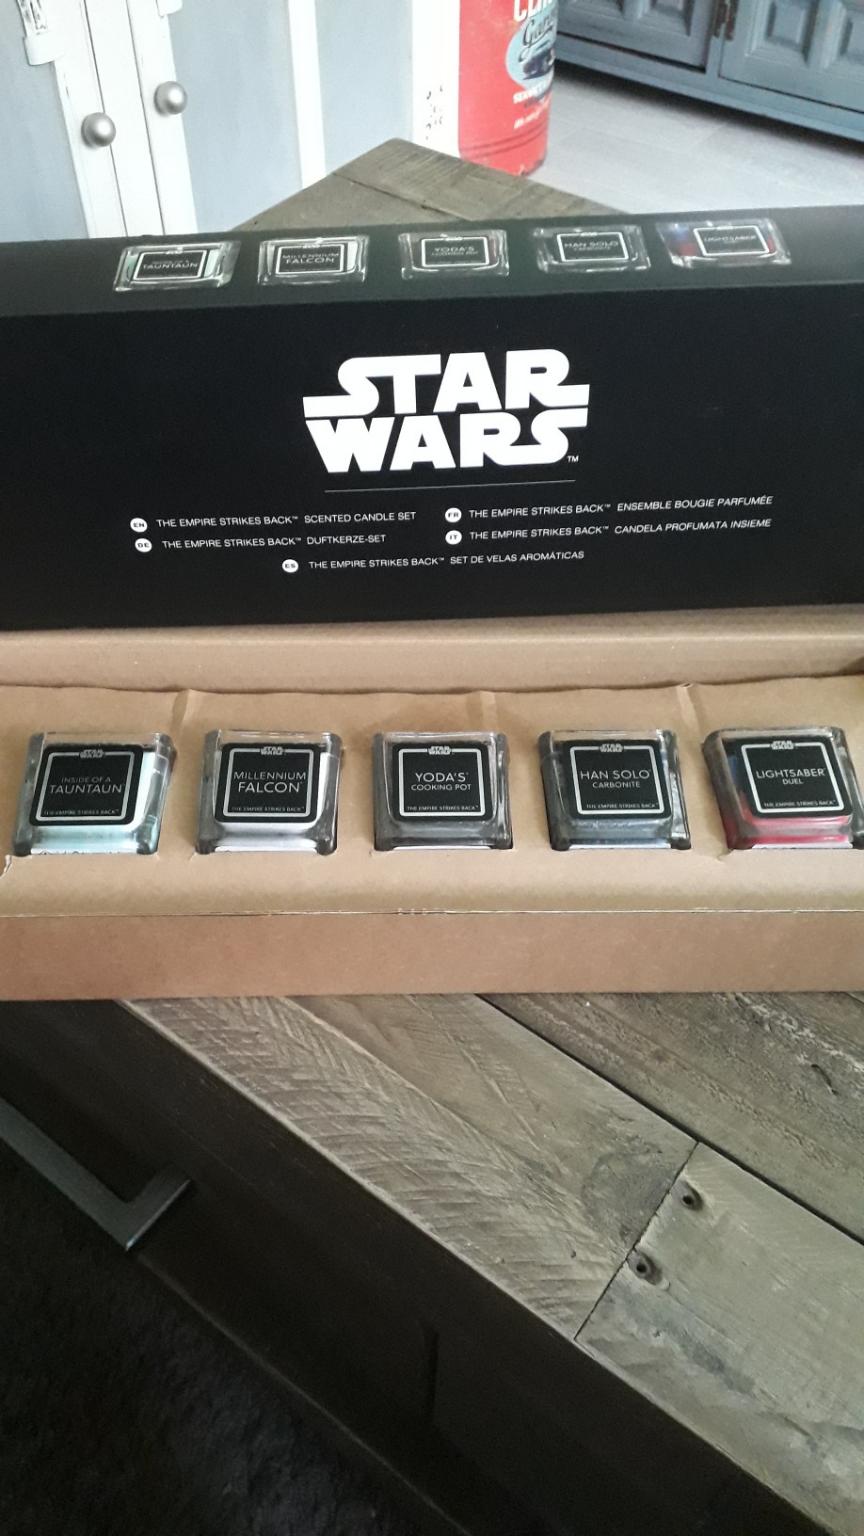 Star Wars Scented Candle Set Empire Strikes Back